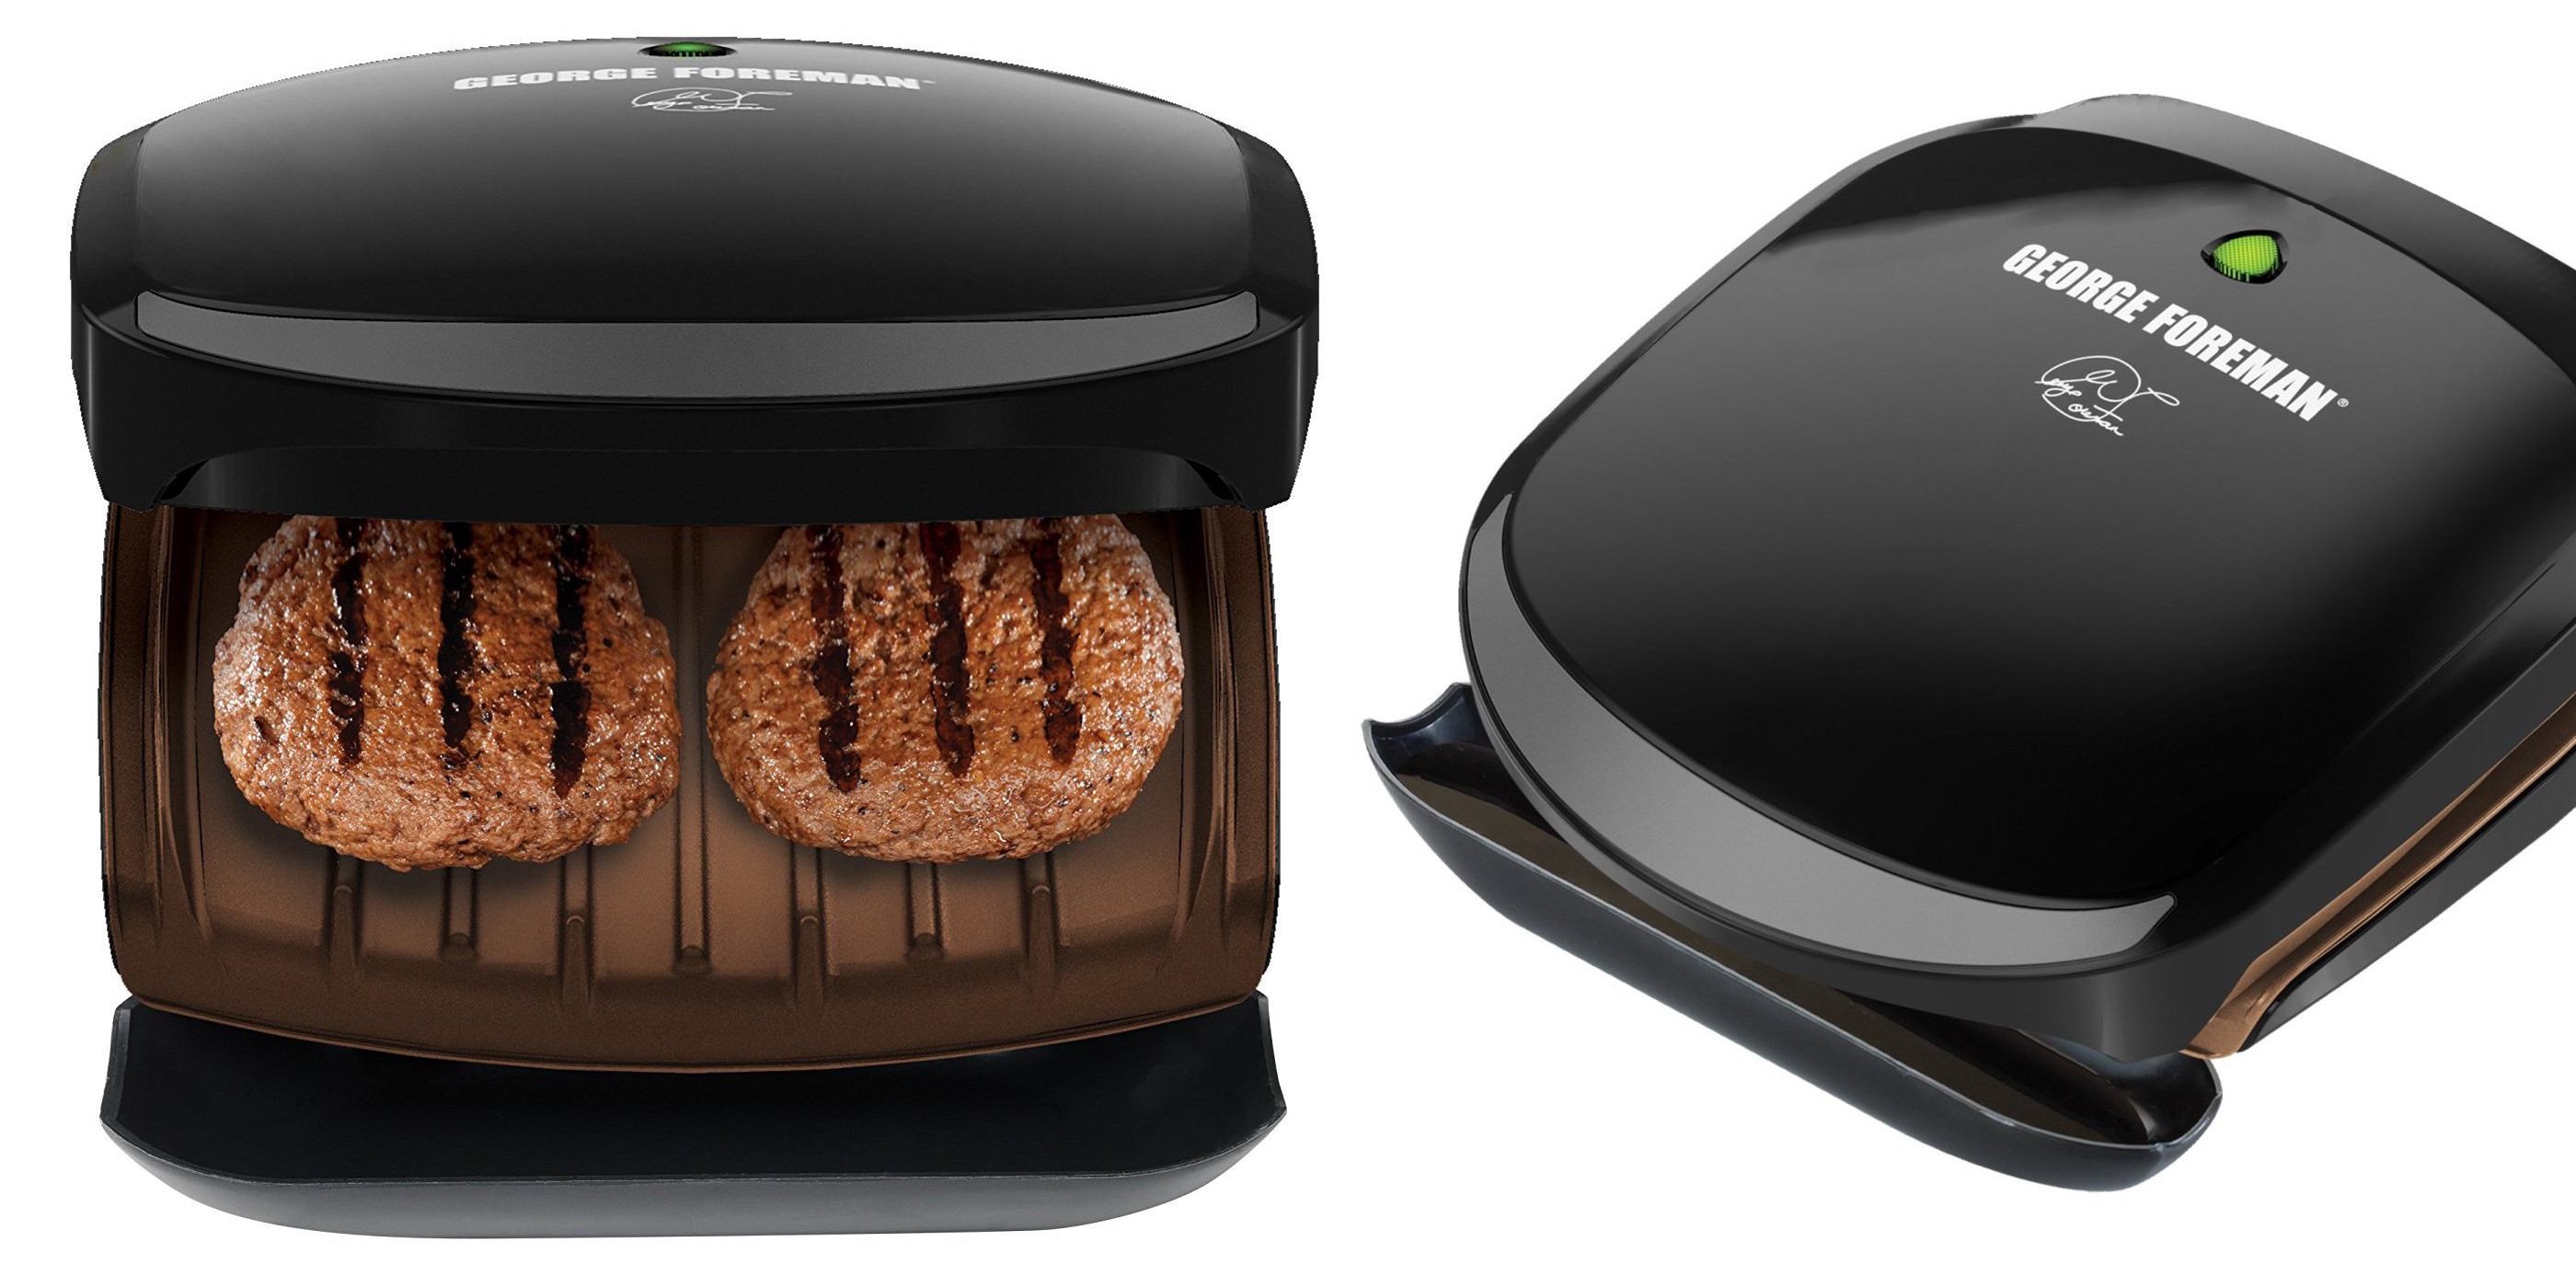 https://9to5toys.com/wp-content/uploads/sites/5/2017/05/george-foreman-2-serving-classic-plate-grill-and-pannini-press-2.jpg